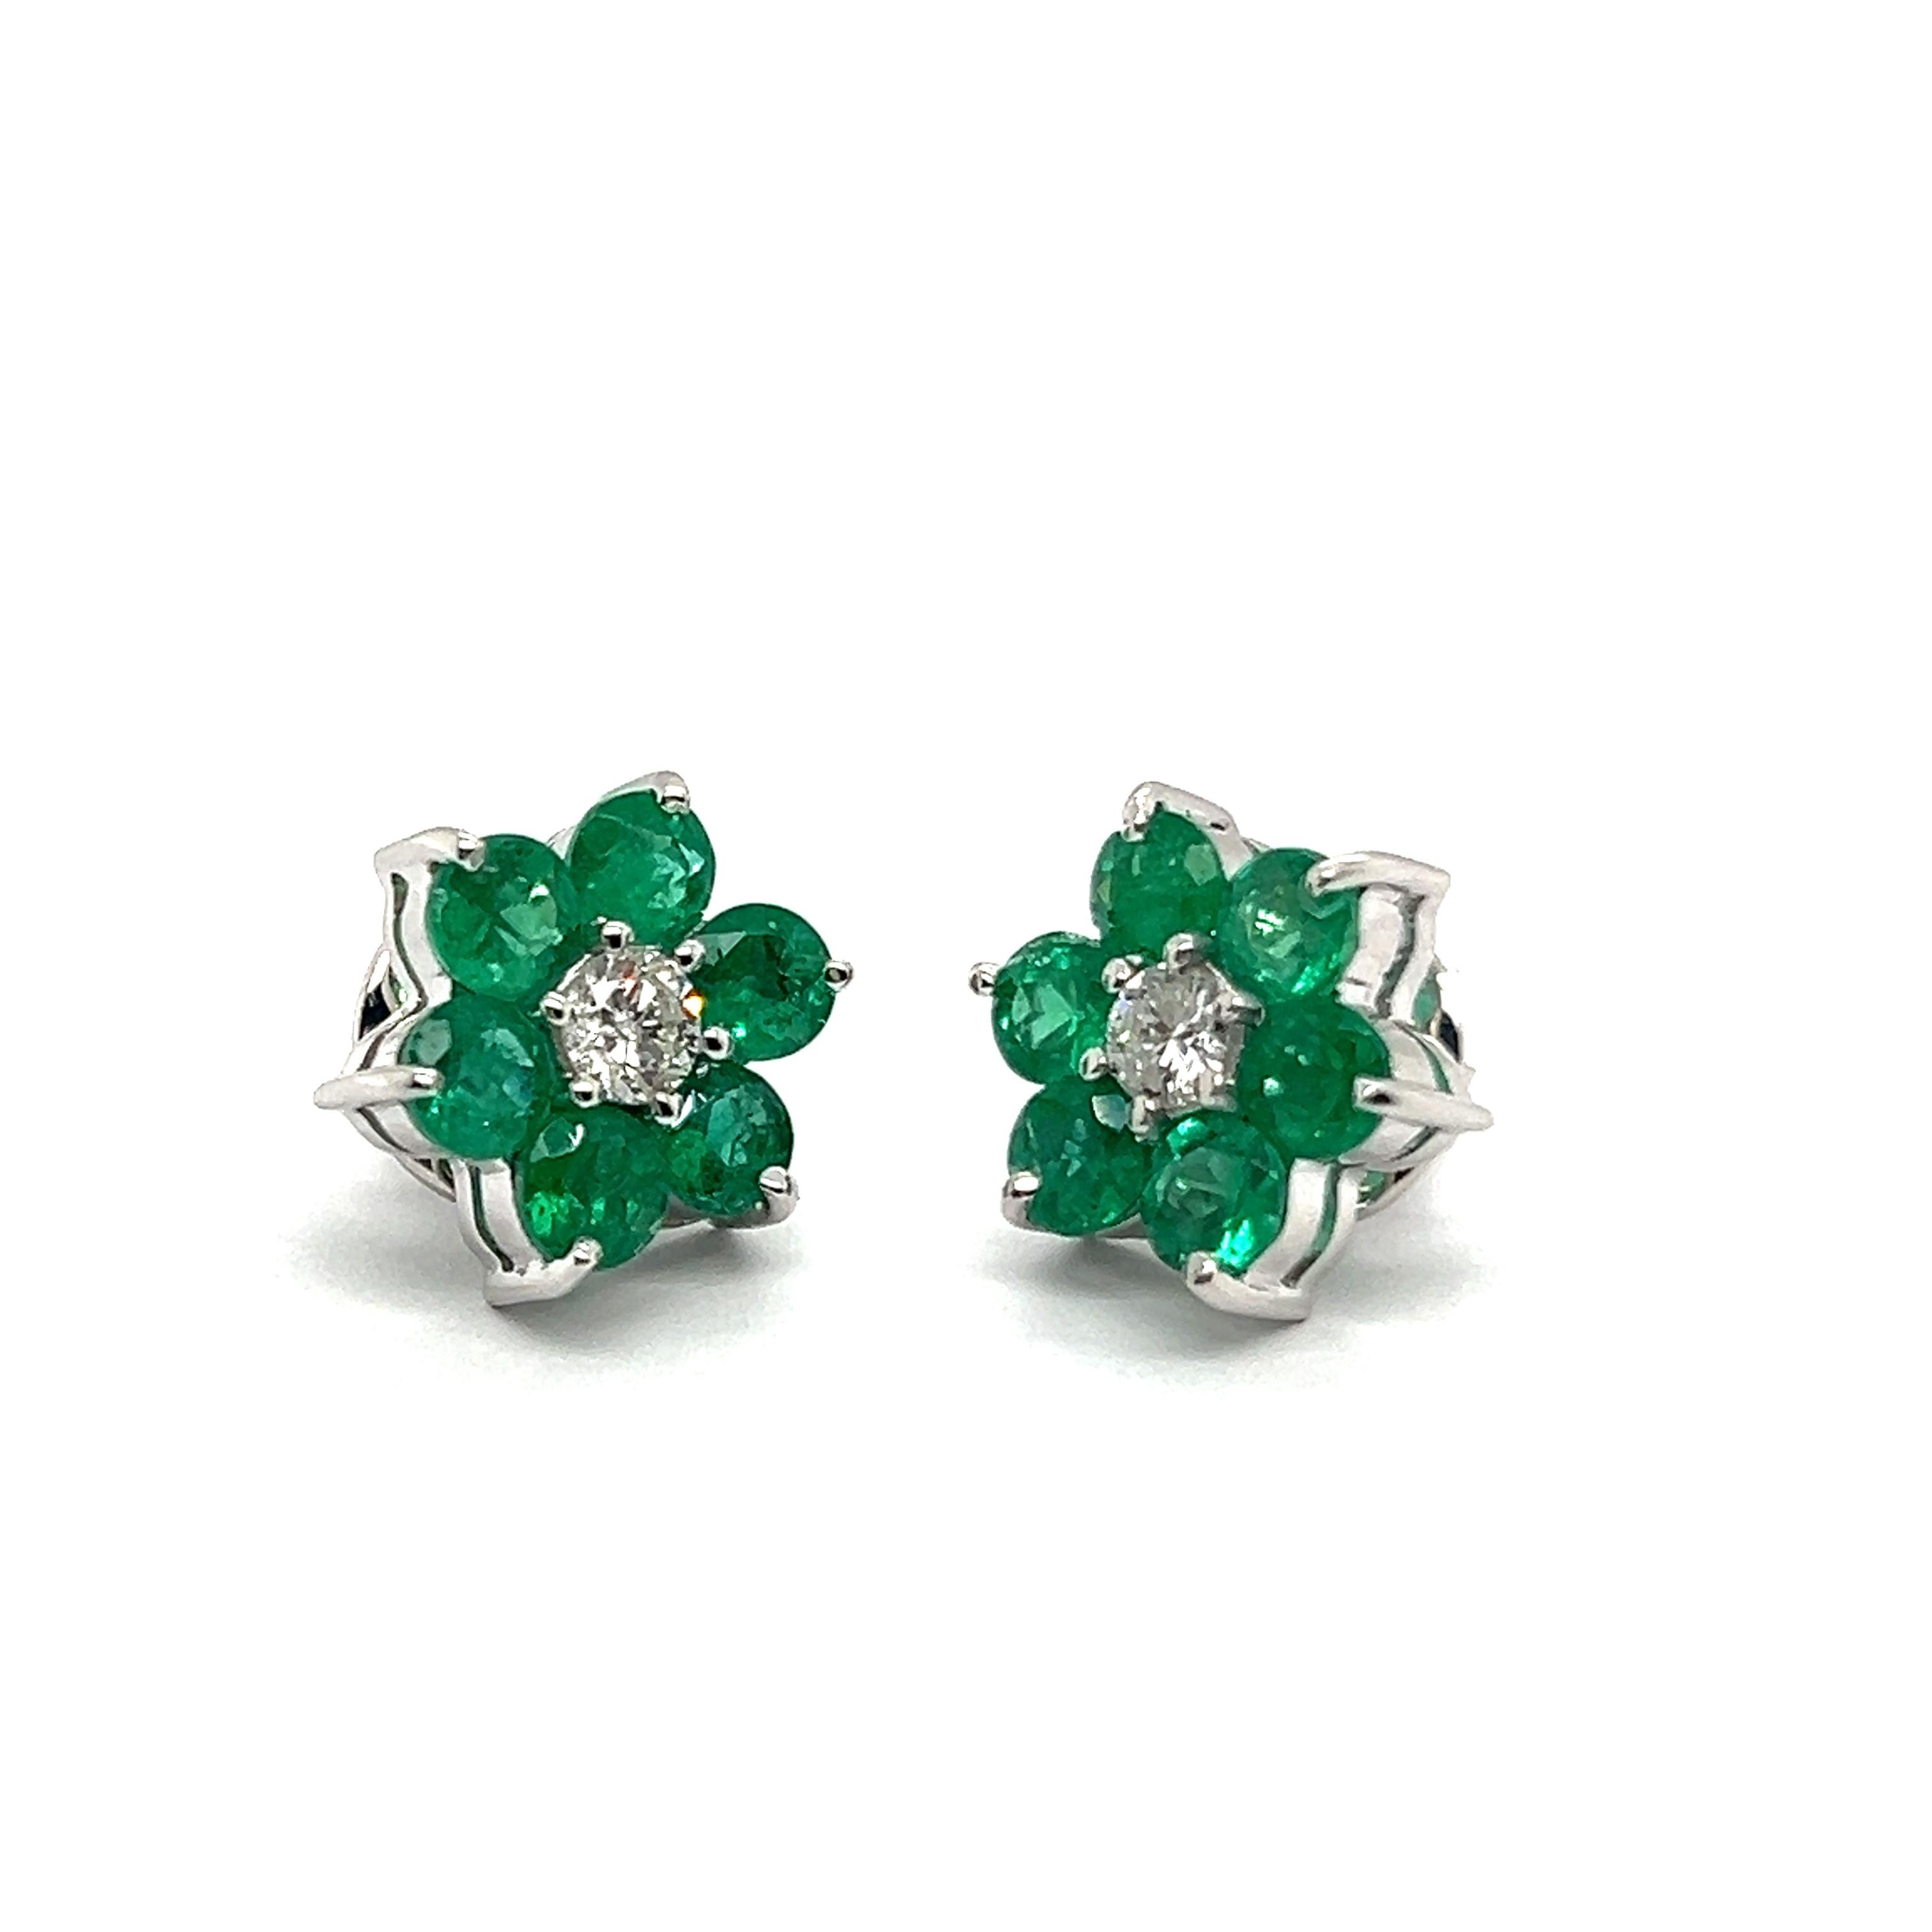 Capture the essence of spring with this stunning emerald and diamond flower stud earrings in 18 Karat white gold.

Resembling petite green daisies each feature six emeralds totaling 1.56 carats. At the center of the blossoms, gleams two diamonds of